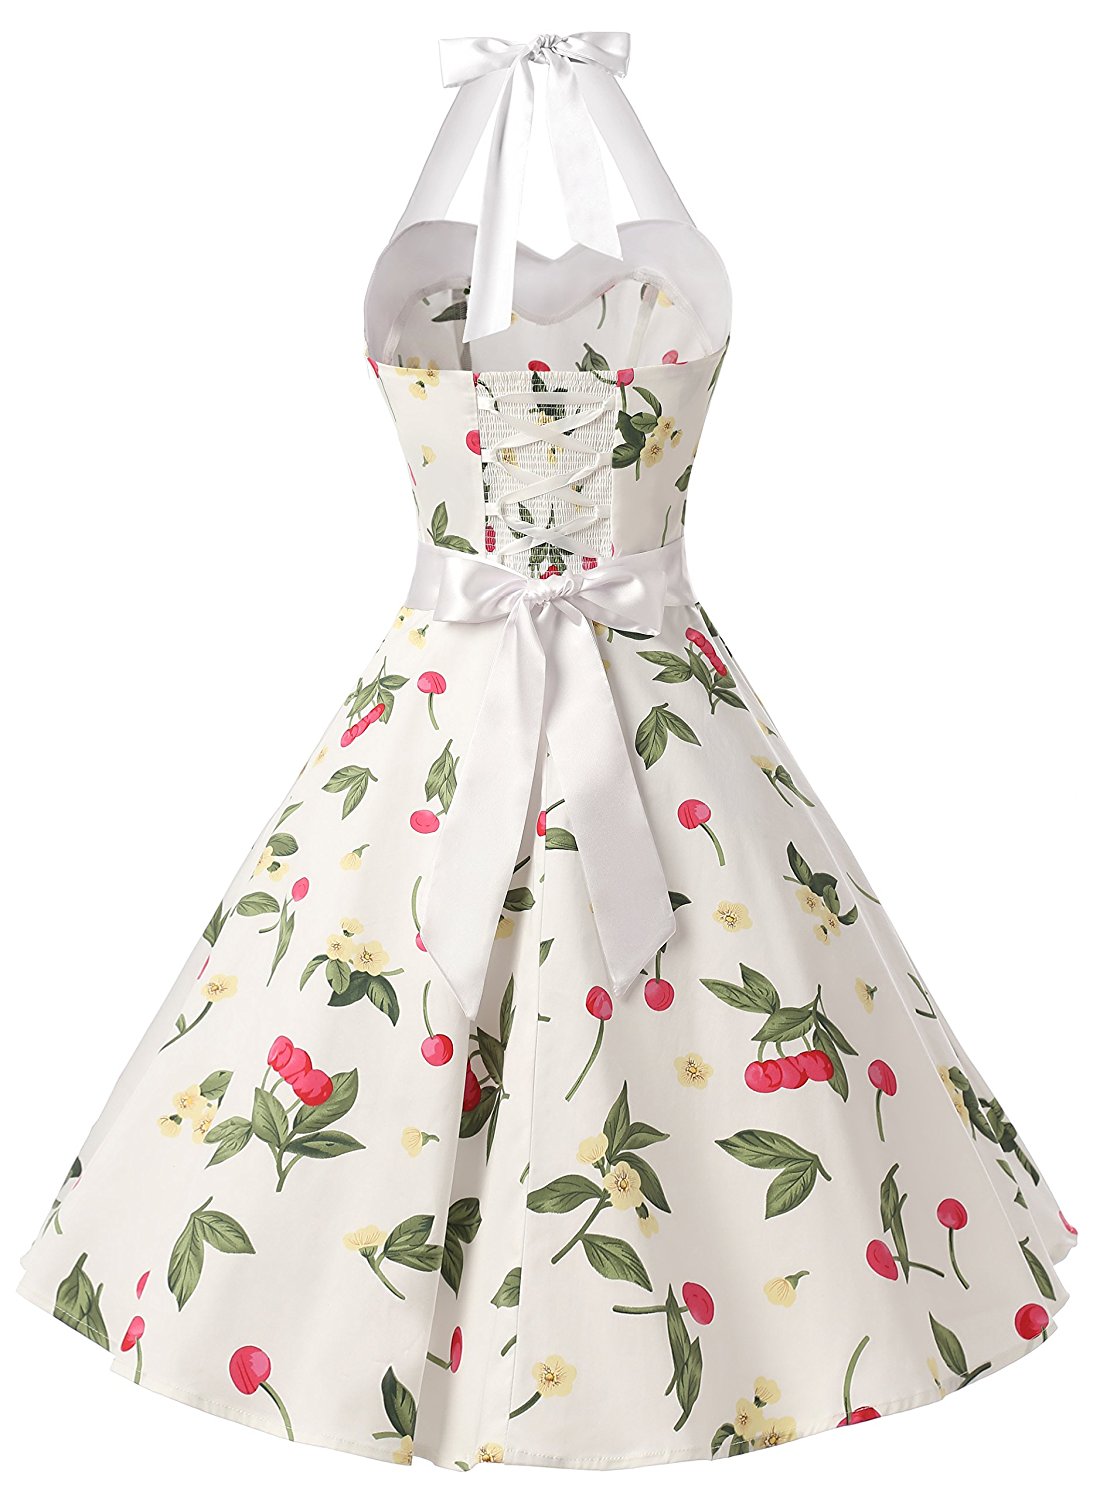 50s Vintage Style Halter White Floral Print Swing Party Dress on Luulla